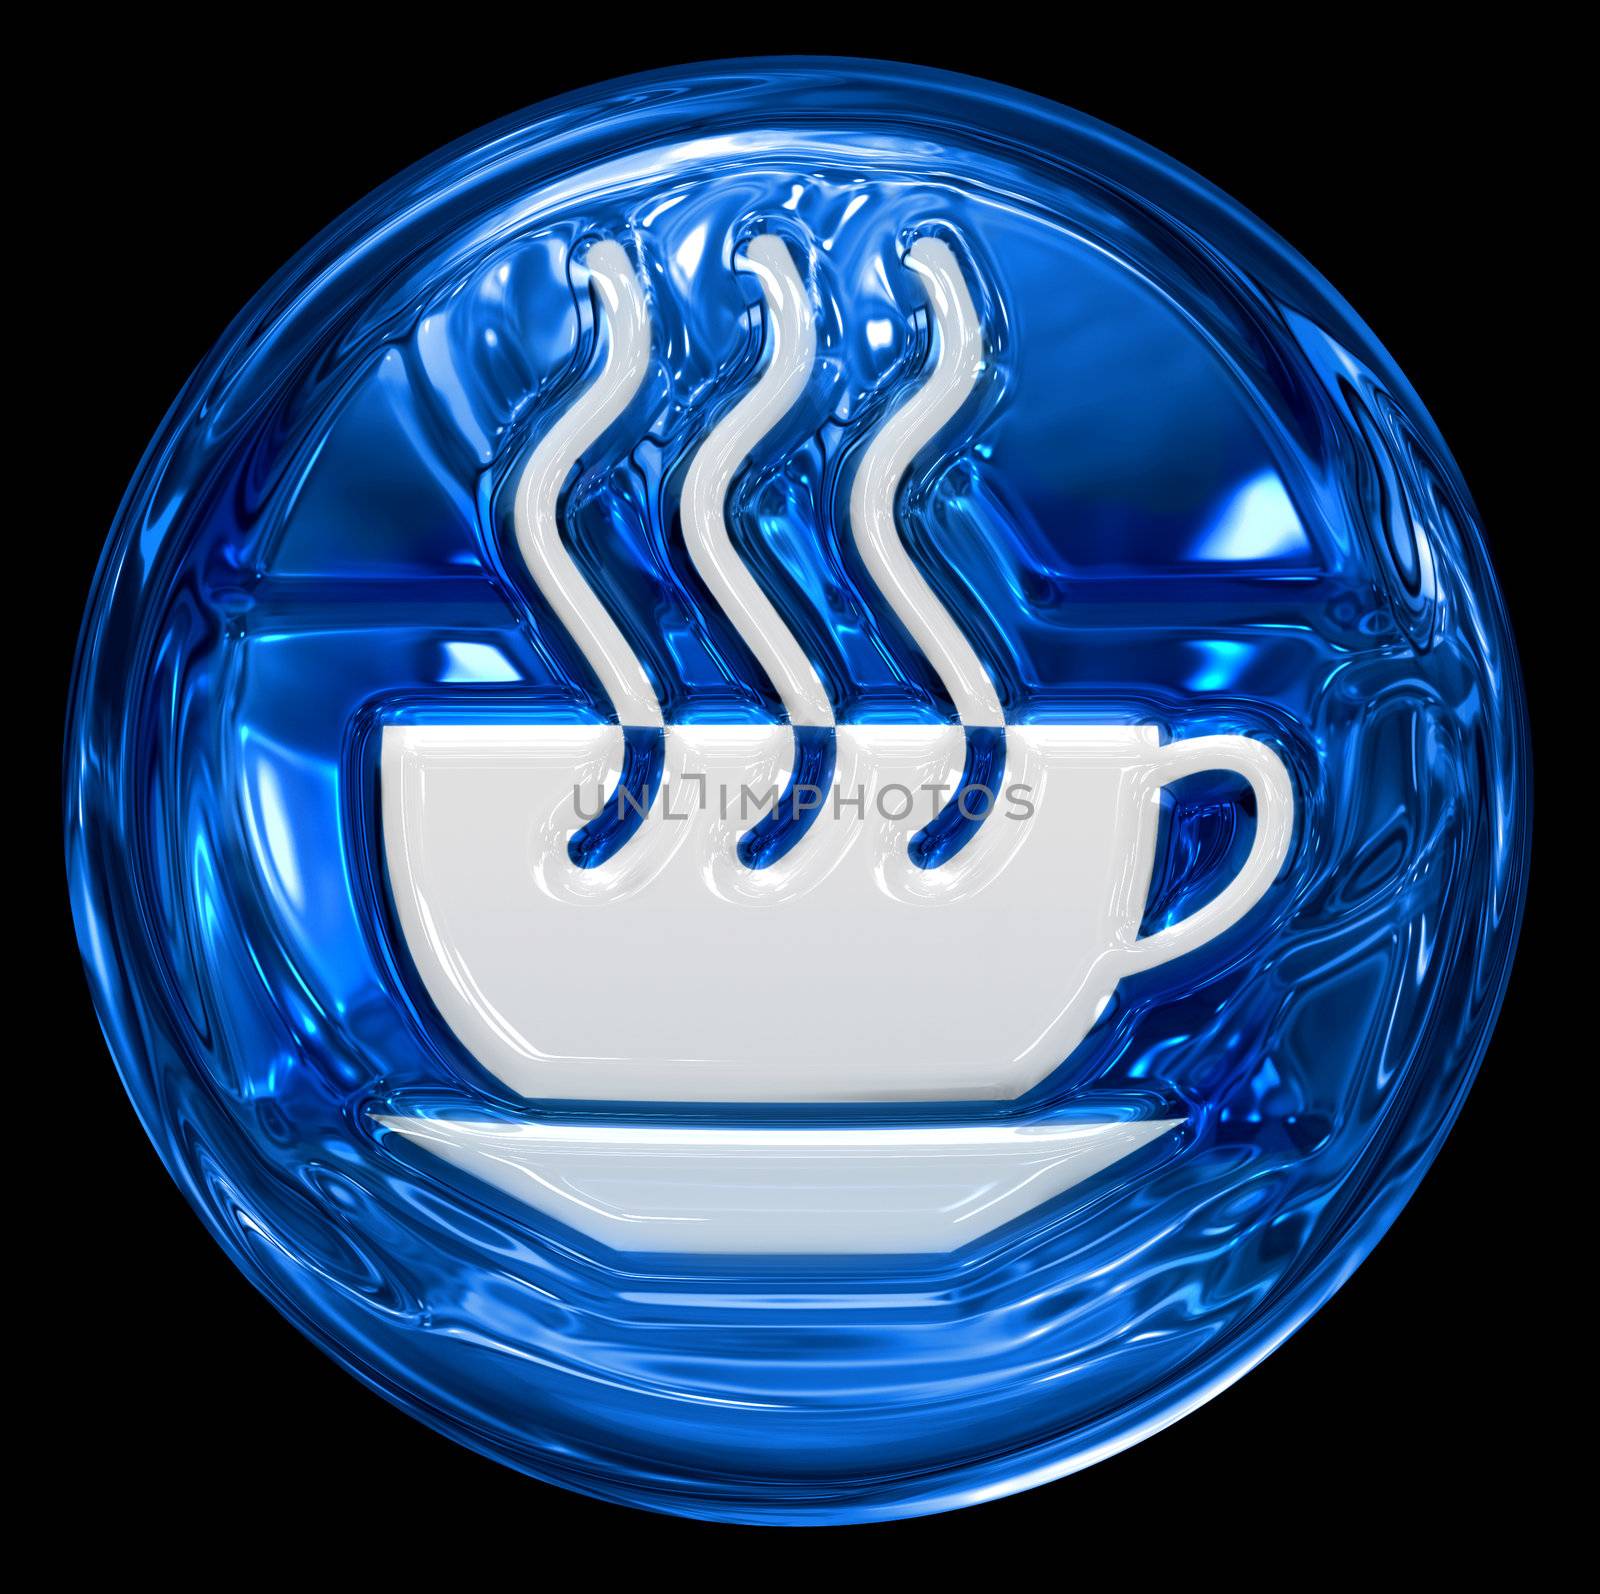 coffee cup icon blue, isolated on black background.